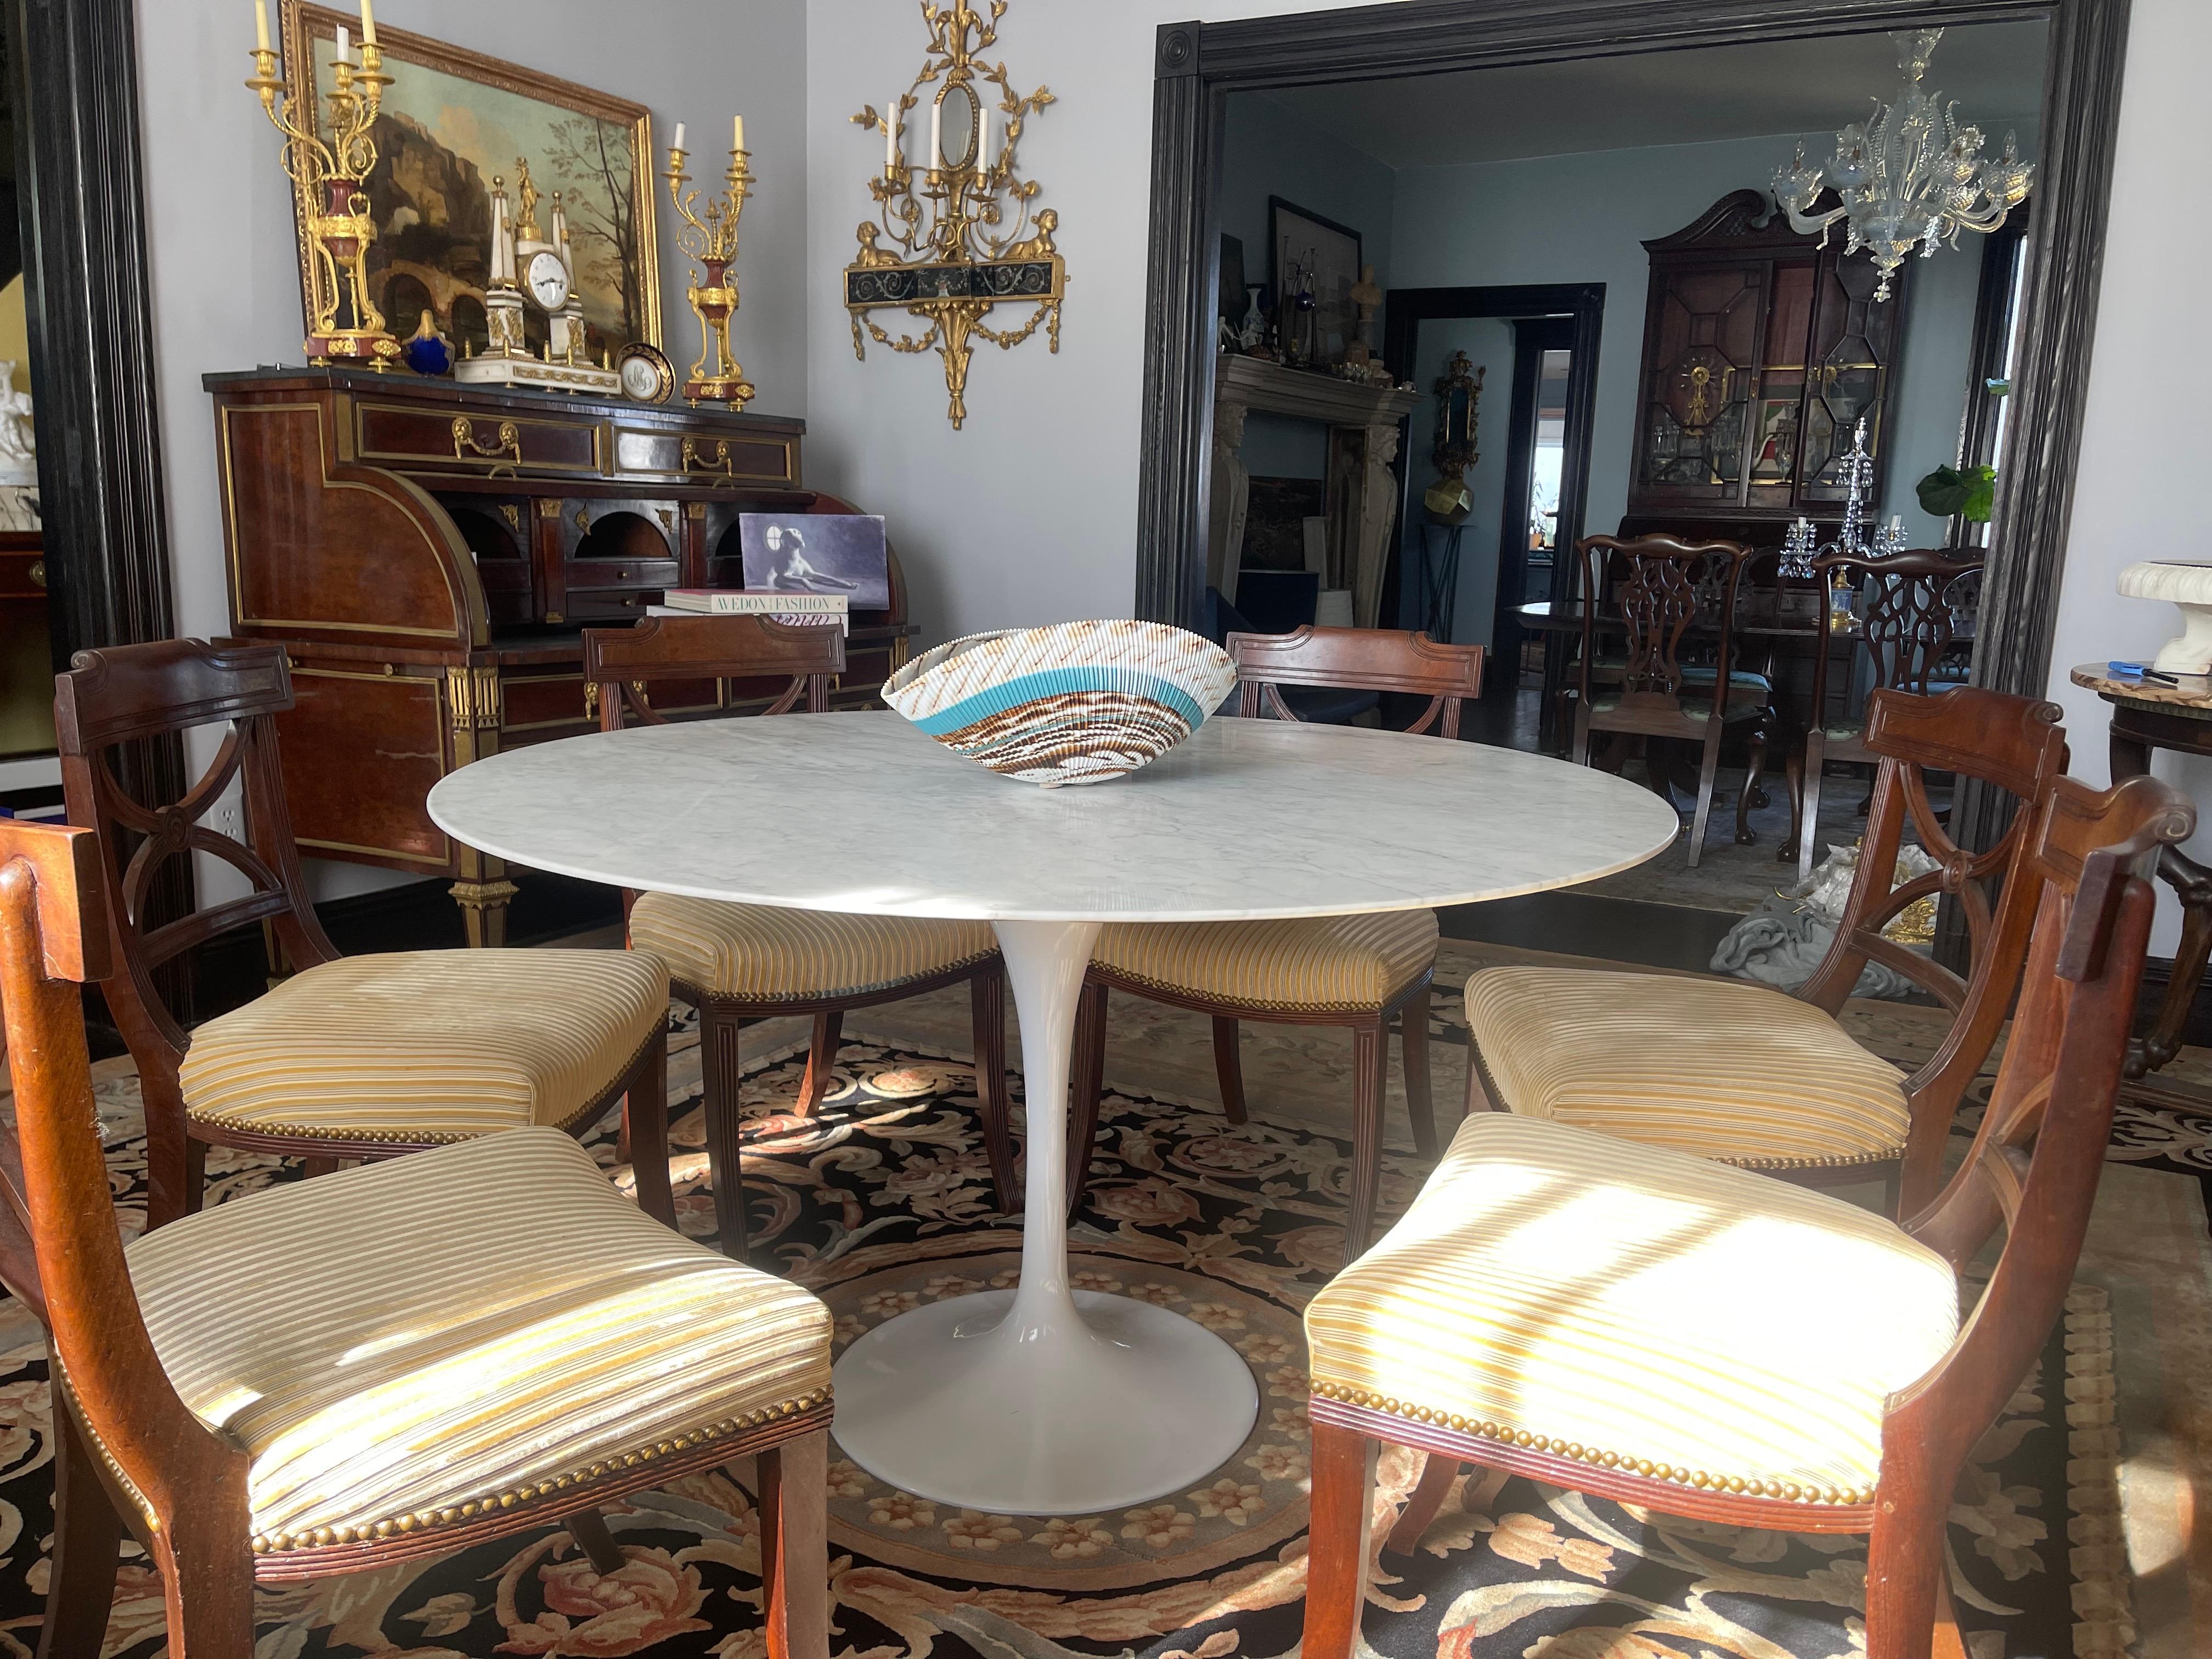 We are offering this 51” diameter Carrara marble top dining table. 
It was authentically created using the same quality standards and materials as Knoll’s 1960’s original, except this is in much better condition as most from that era. 
It will seat